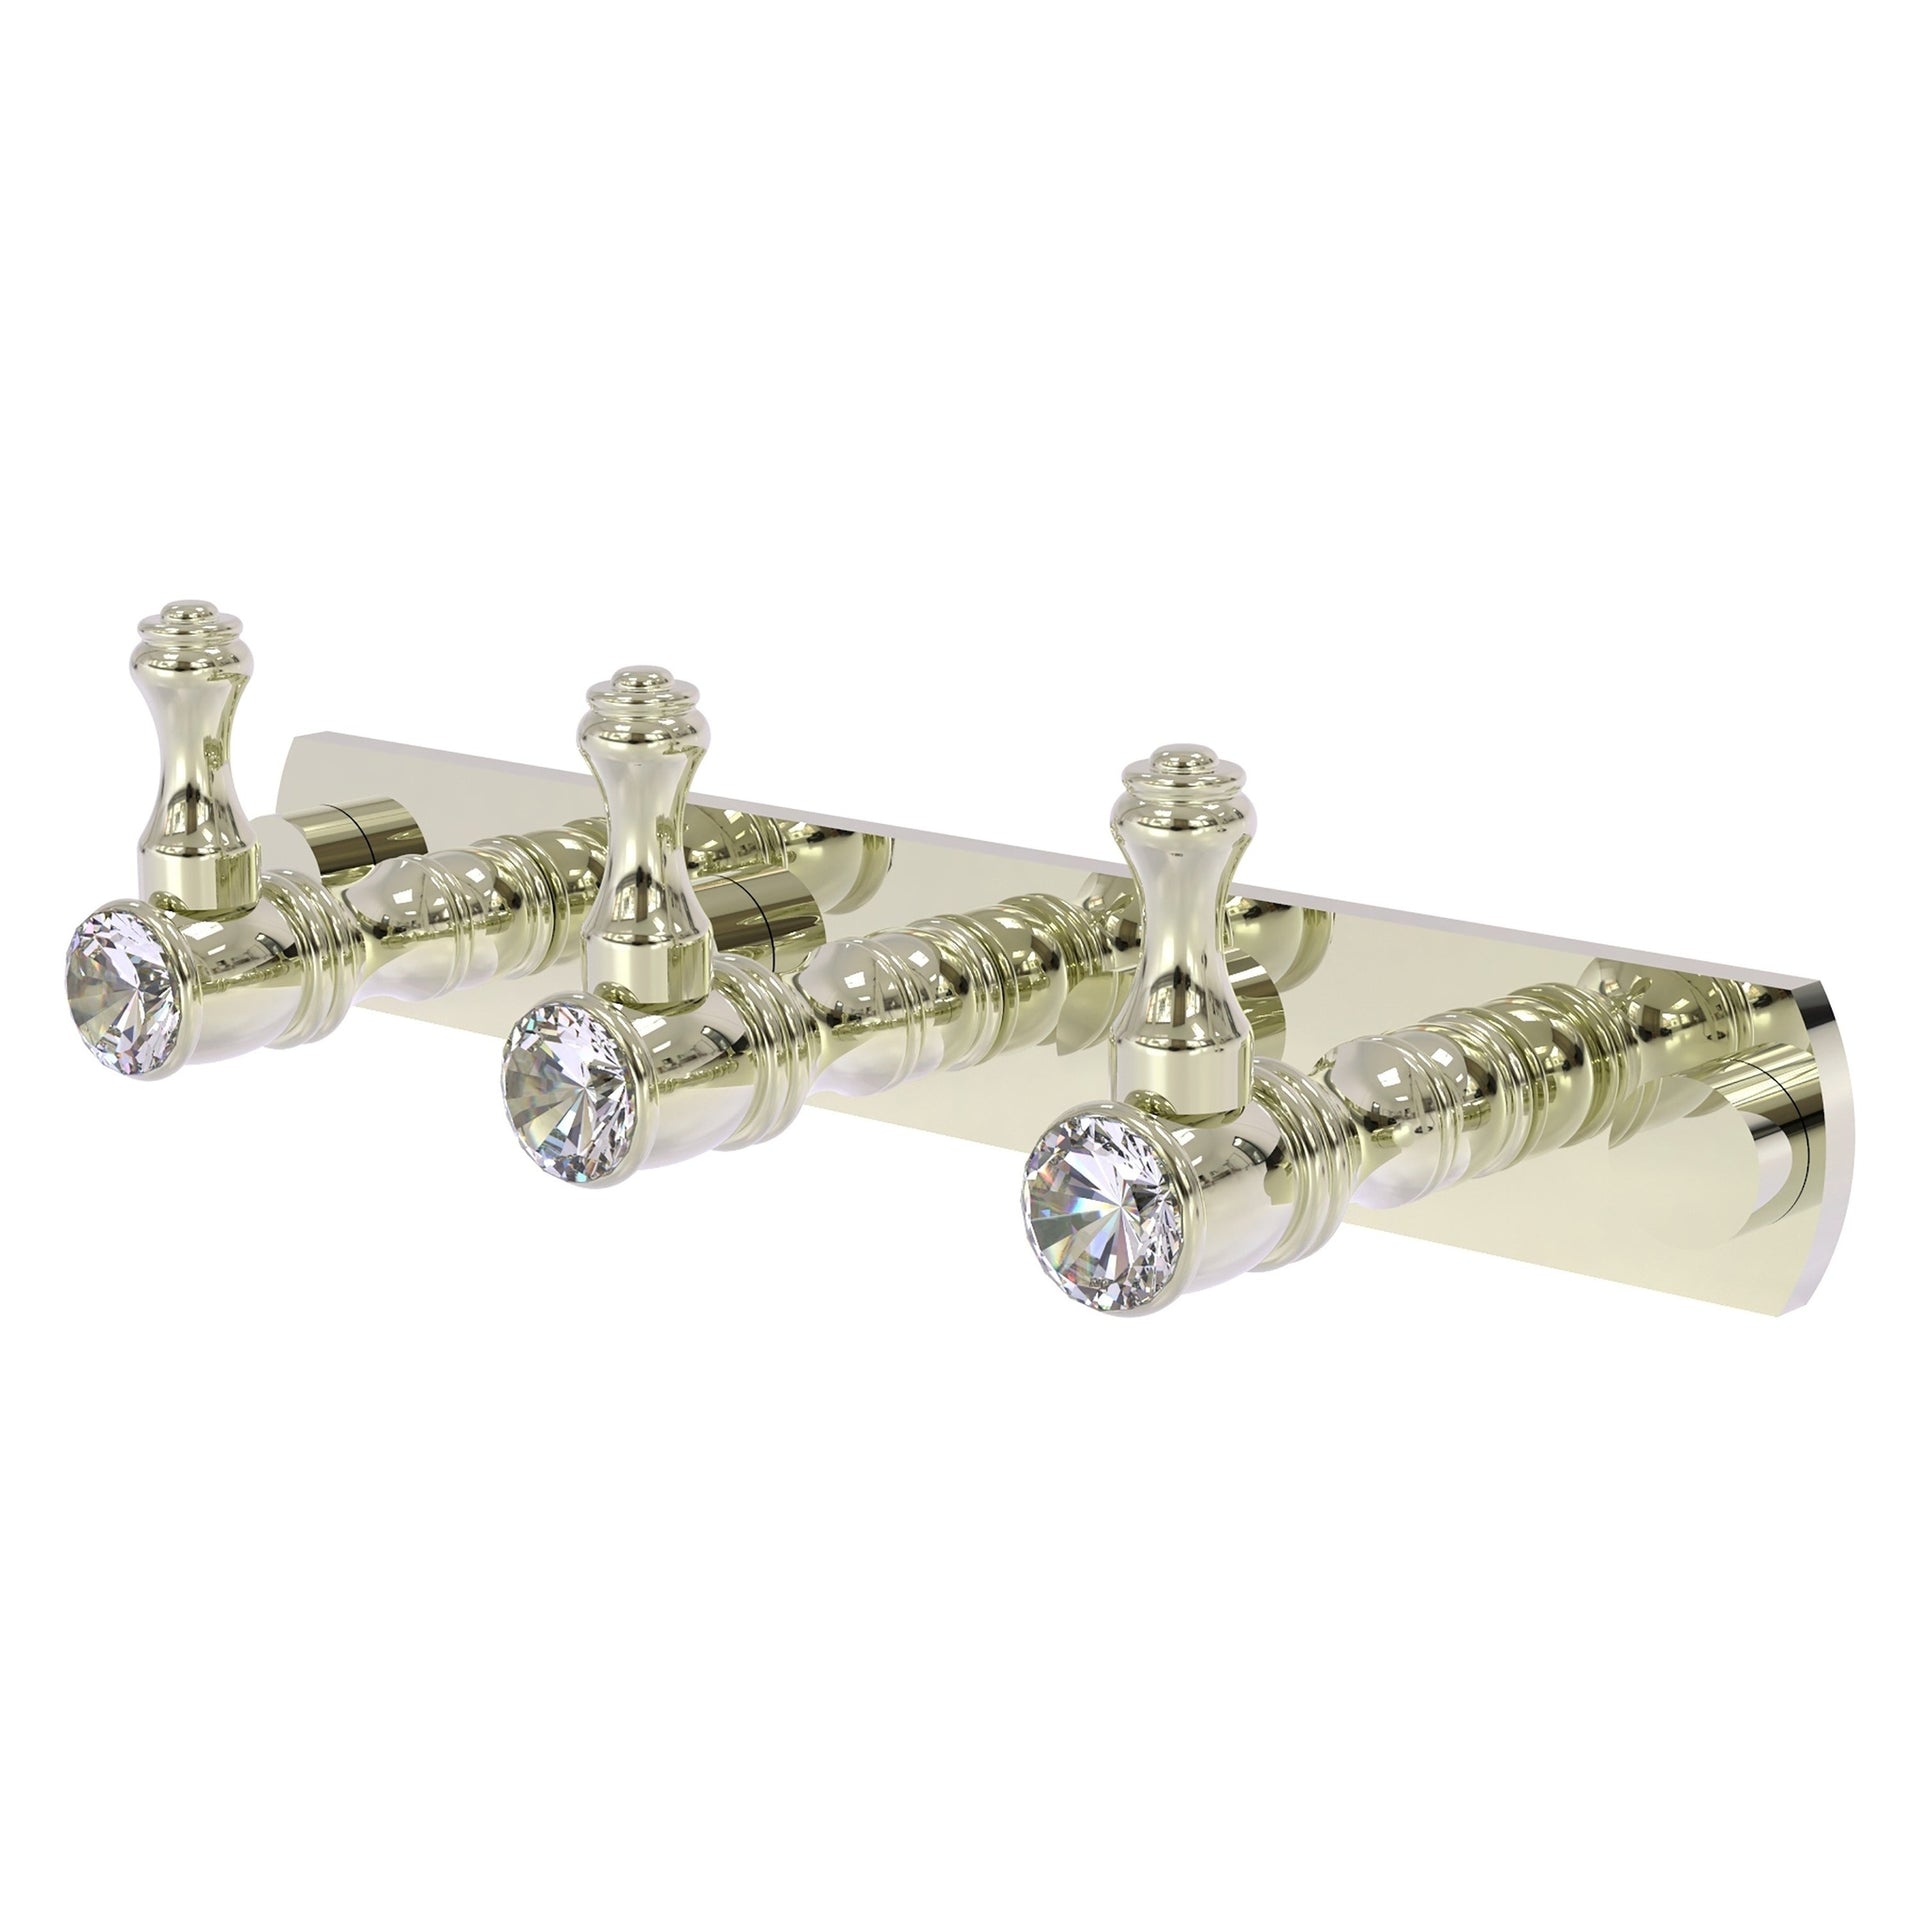 Allied Brass Carolina Crystal Collection 3 Position Tie and Belt Rack - Polished Nickel